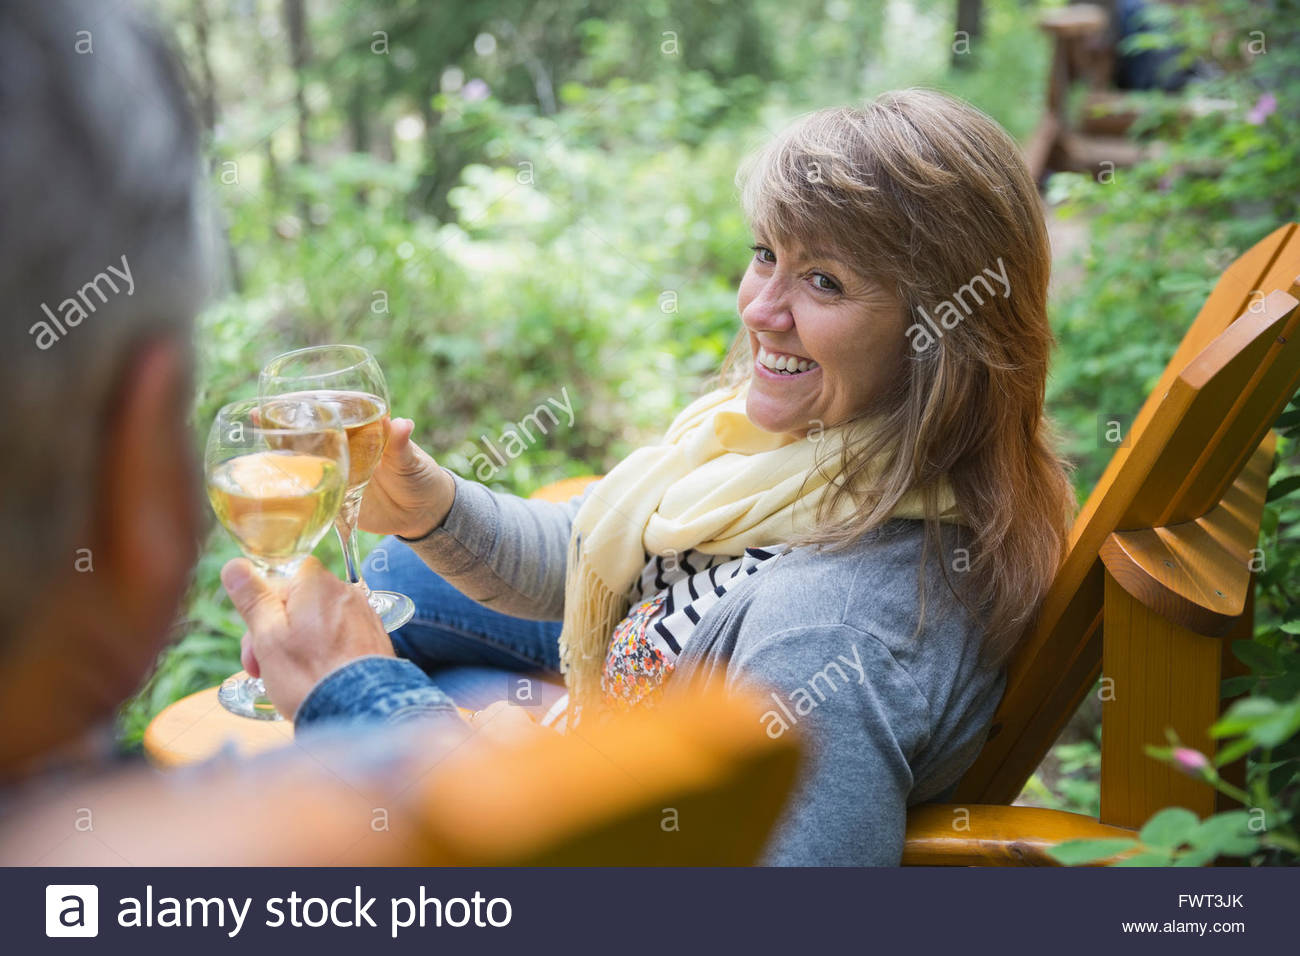 Middle-aged woman drinking wine outdoors Stock Photo